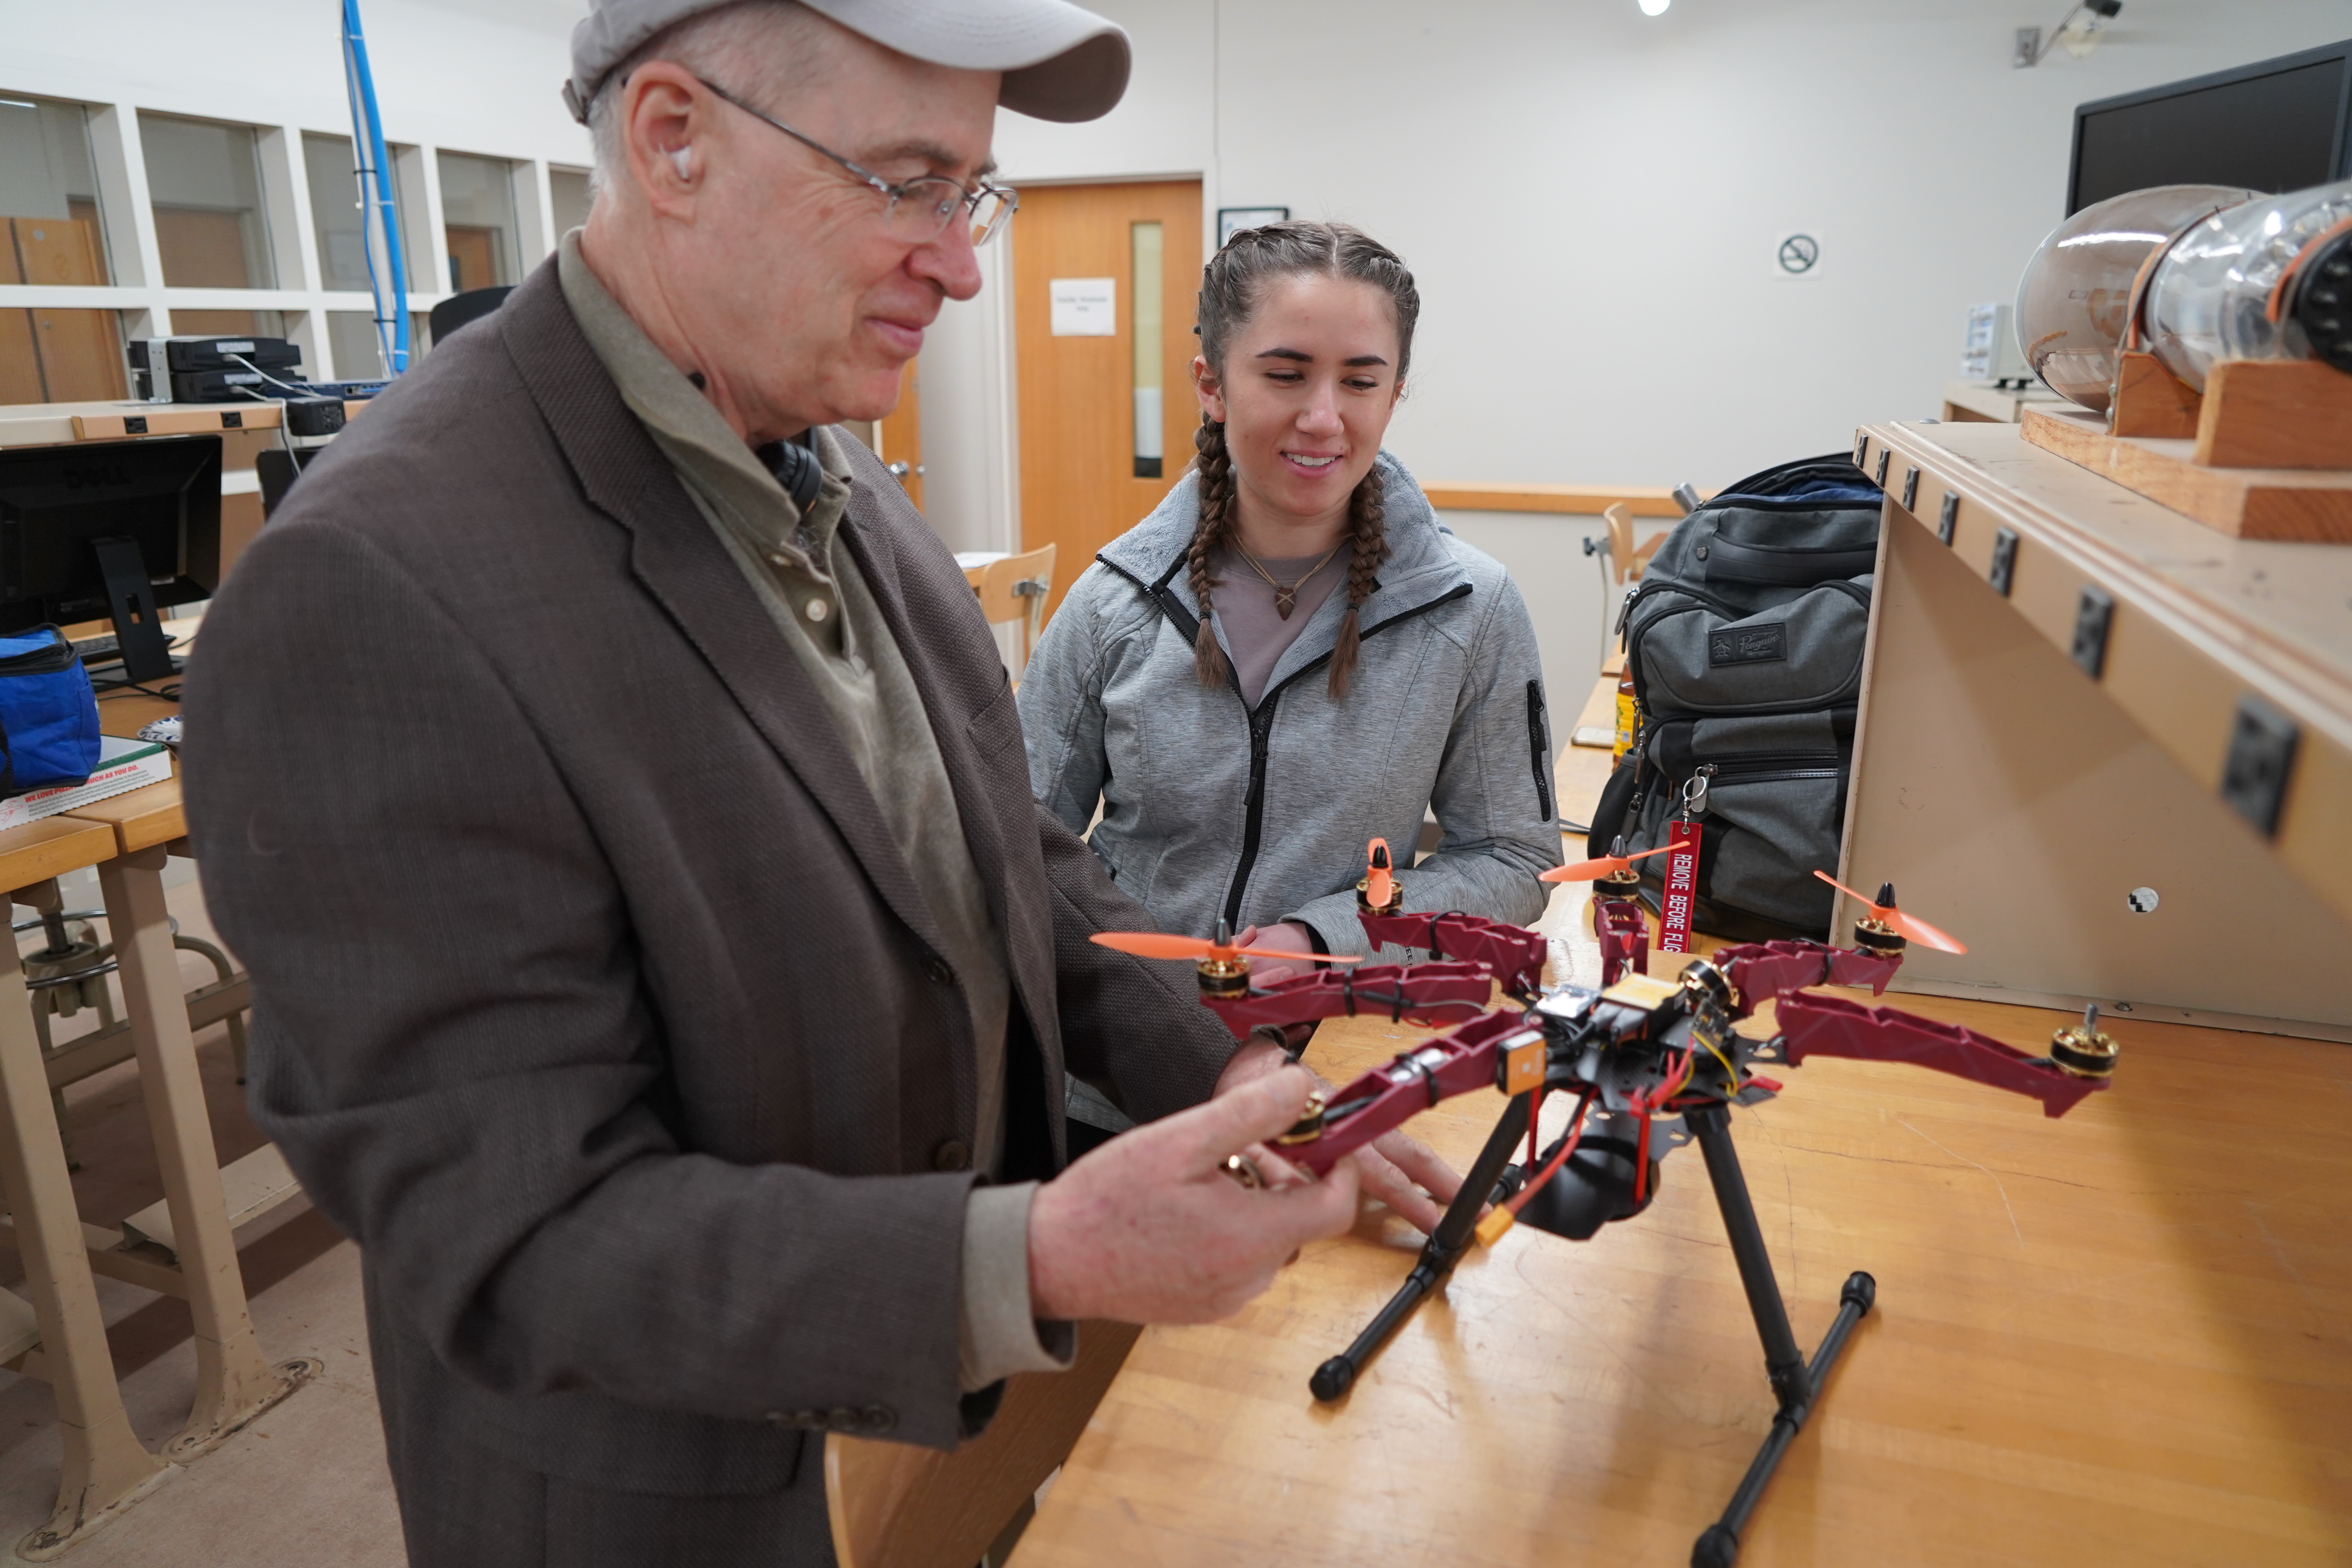 Drone Drop Planning with Dr. Hansen and Student Valerie